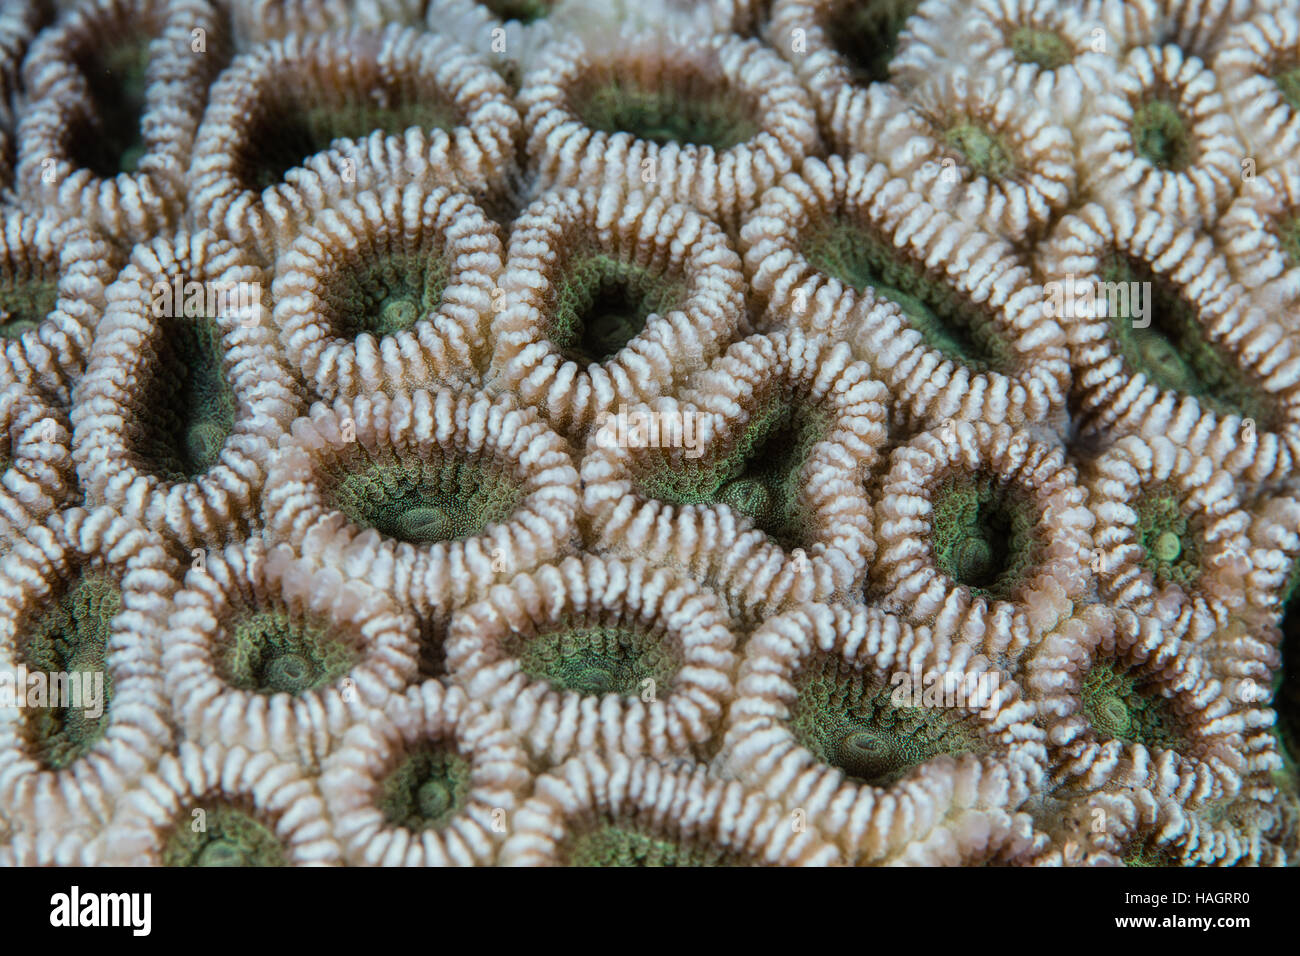 Detail of a coral colony (Favia sp.) growing on a reef in Indonesia. This region harbors extraordinary marine biodiversity. Stock Photo